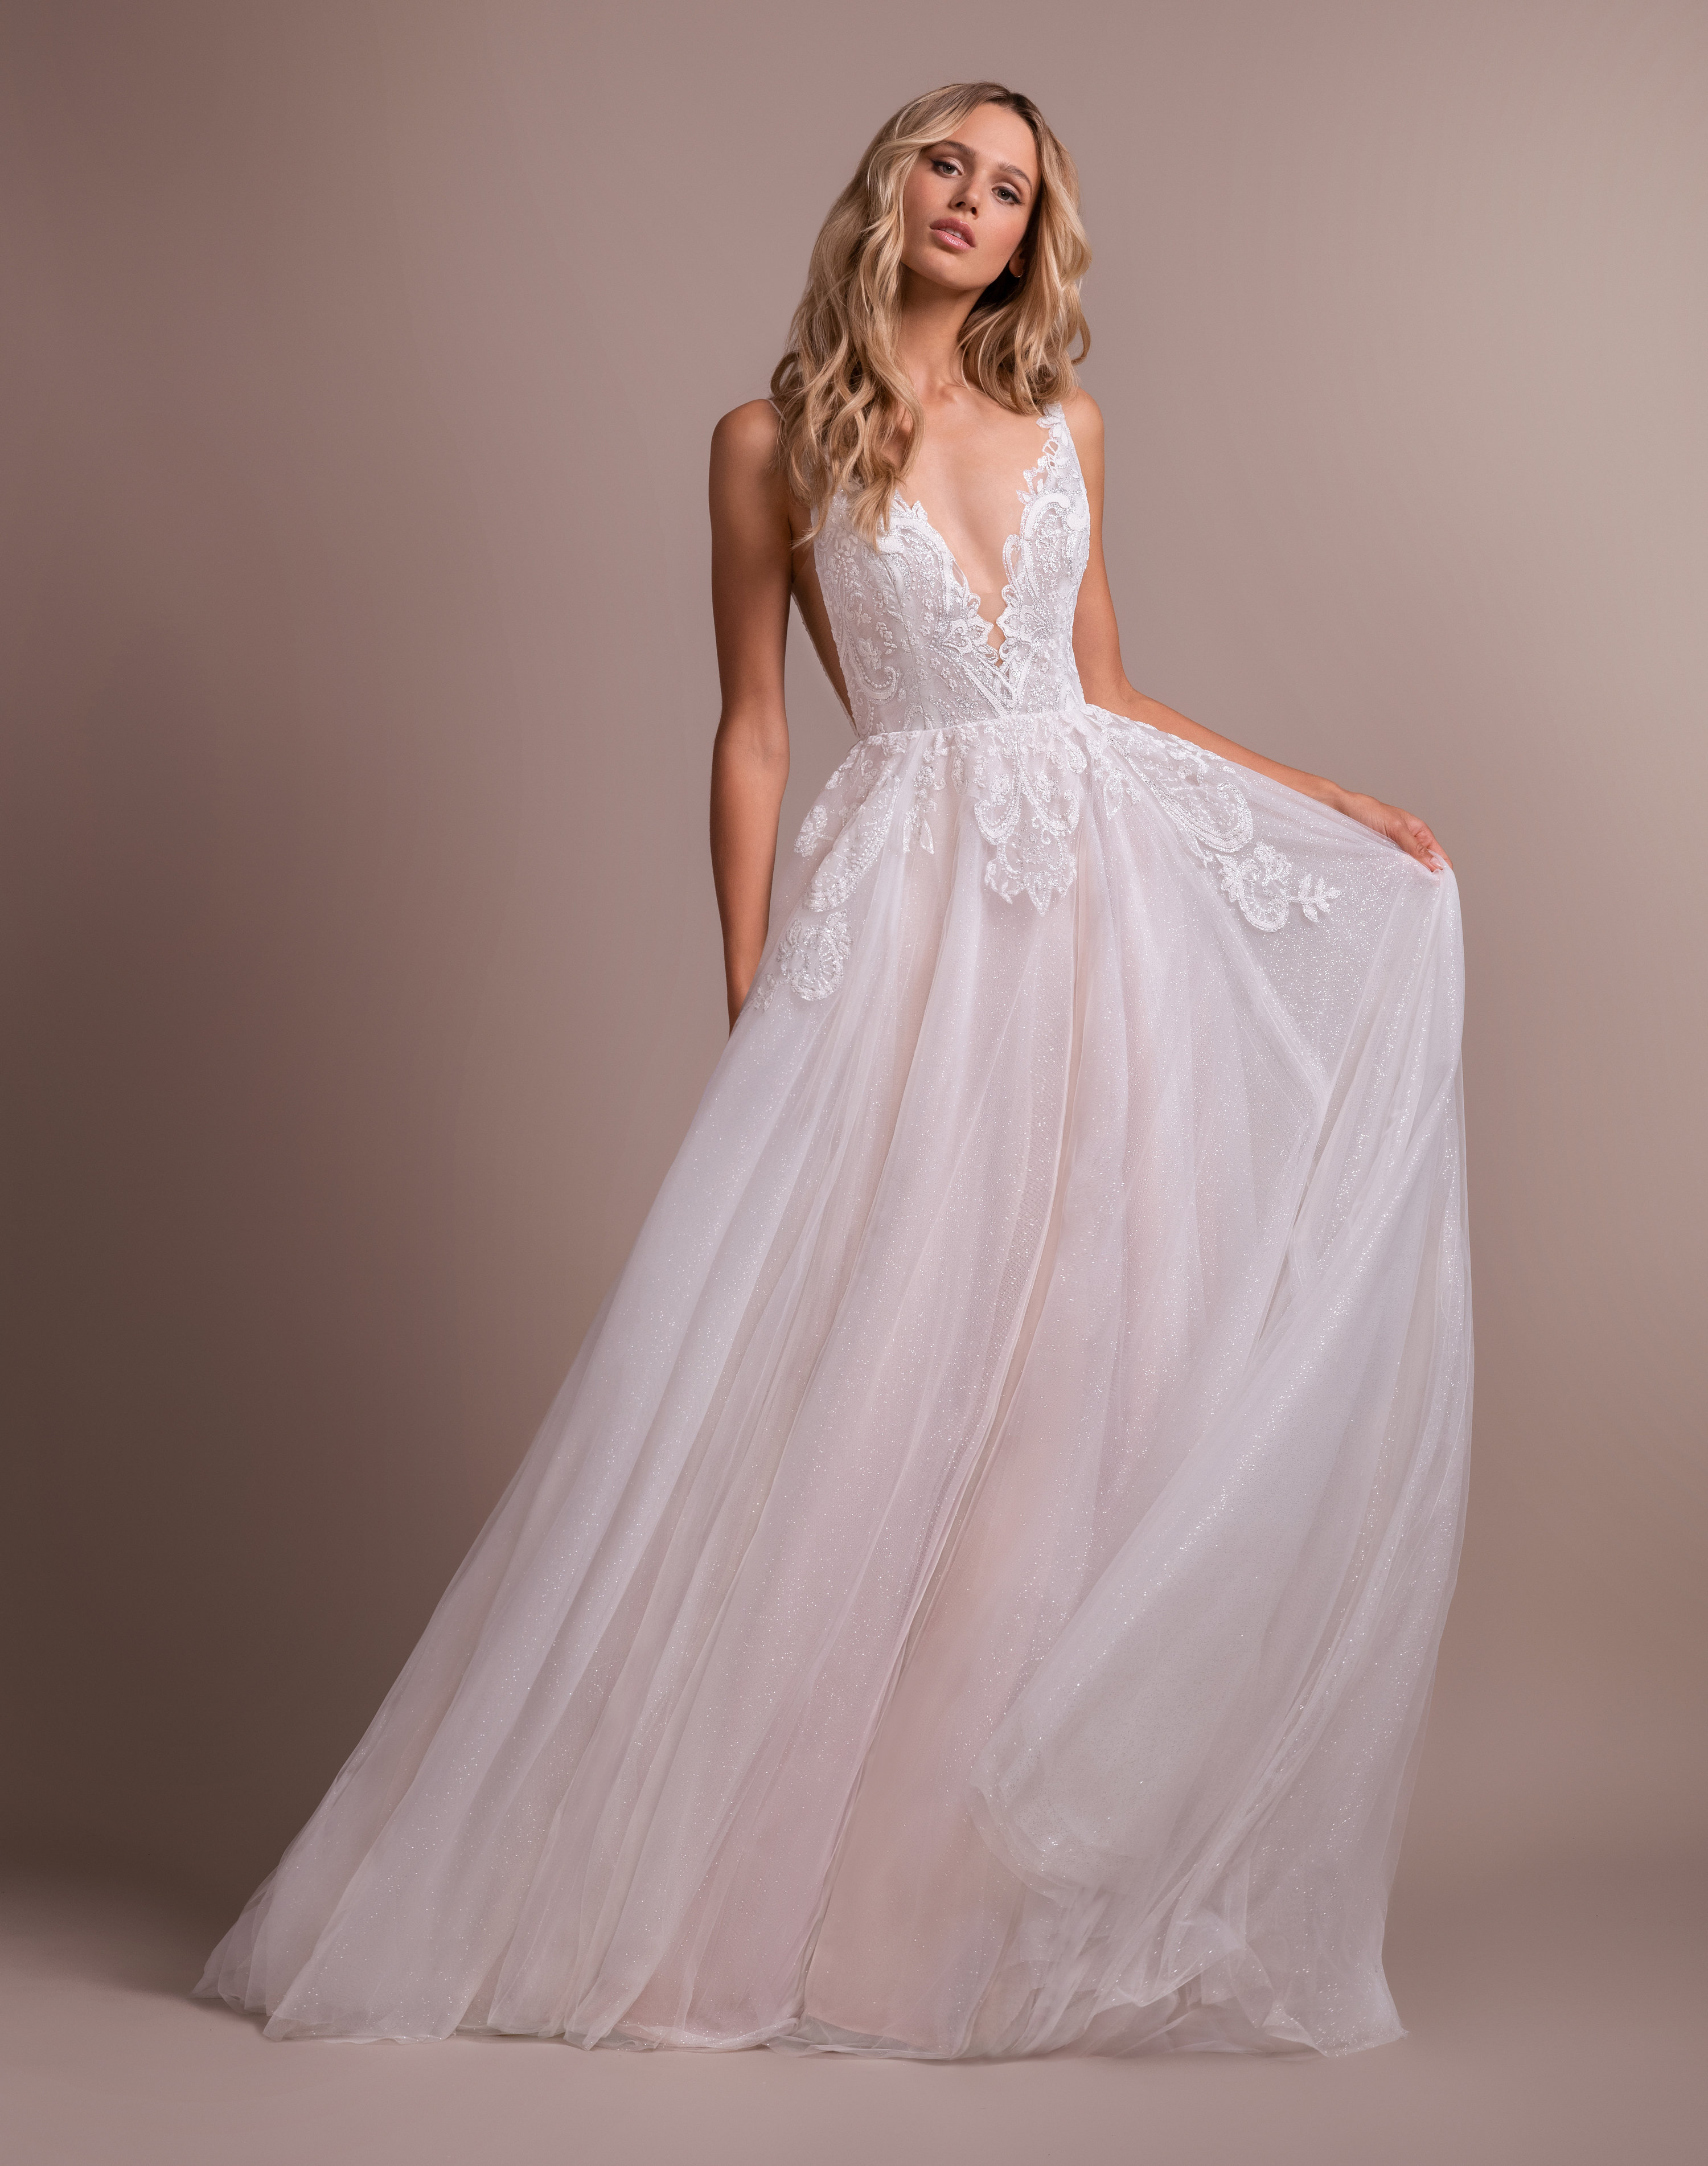  Lace Wedding Dress V Neck  The ultimate guide 